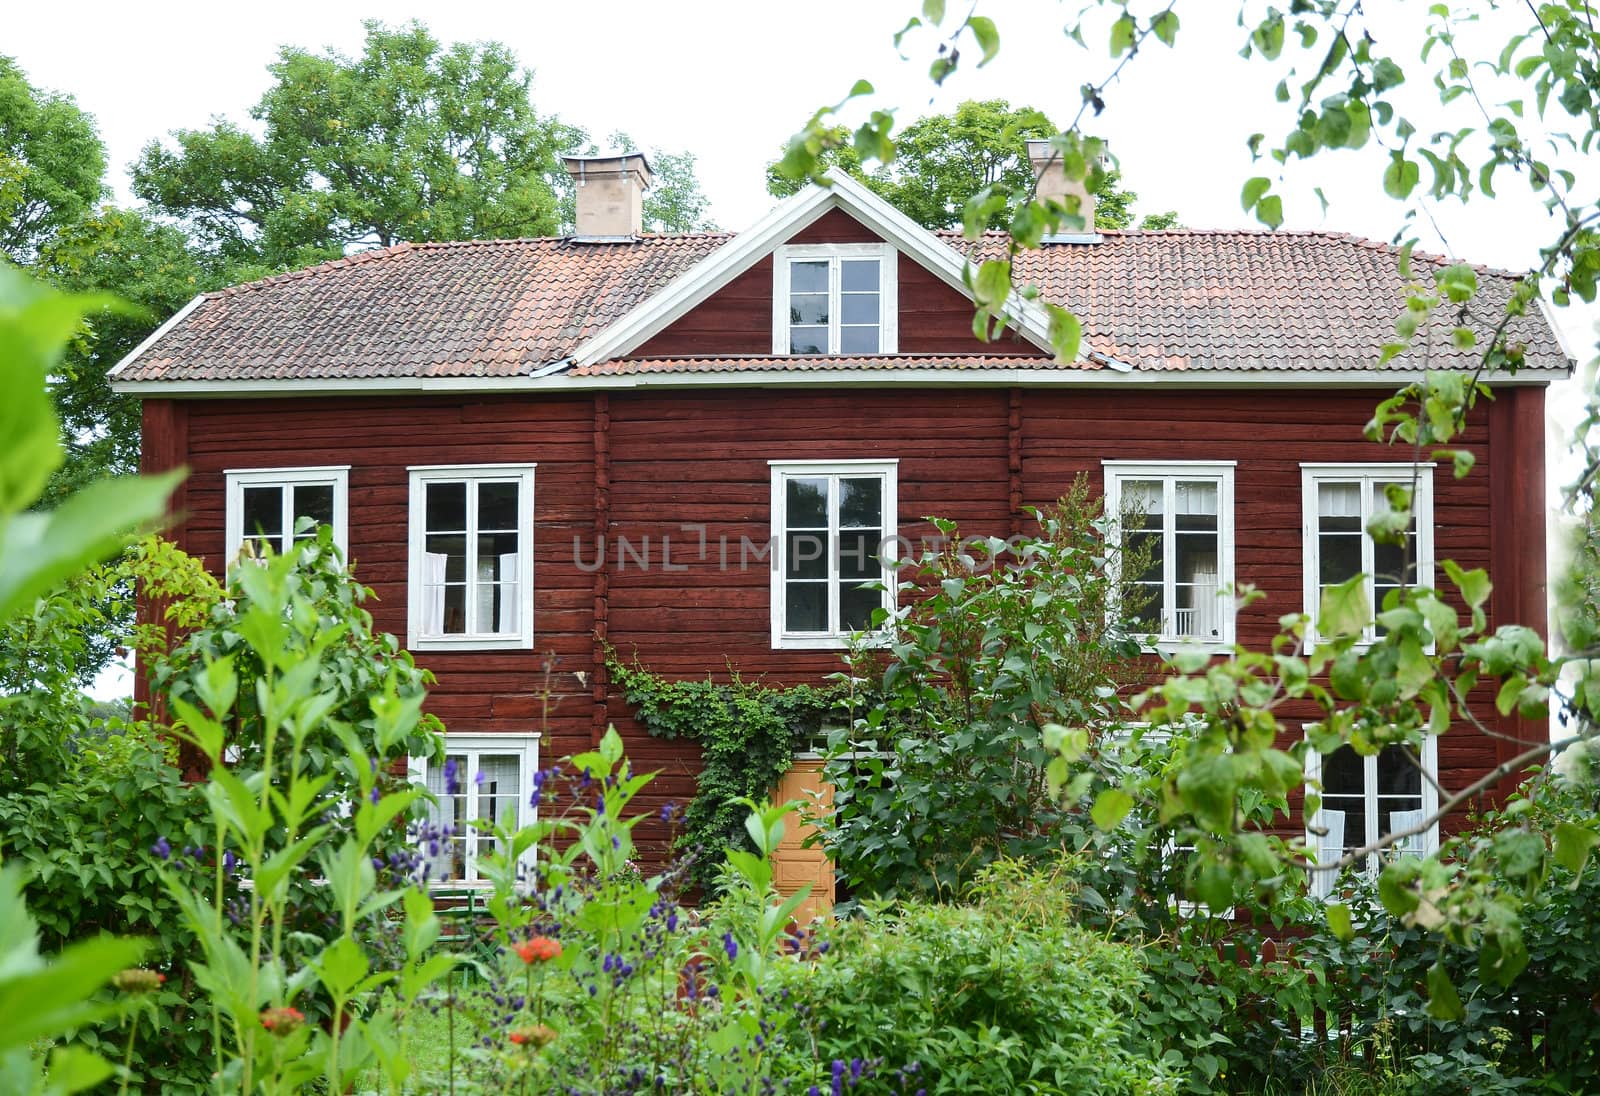 A typical farm in northern Sweden which is also featured on the UNESCO